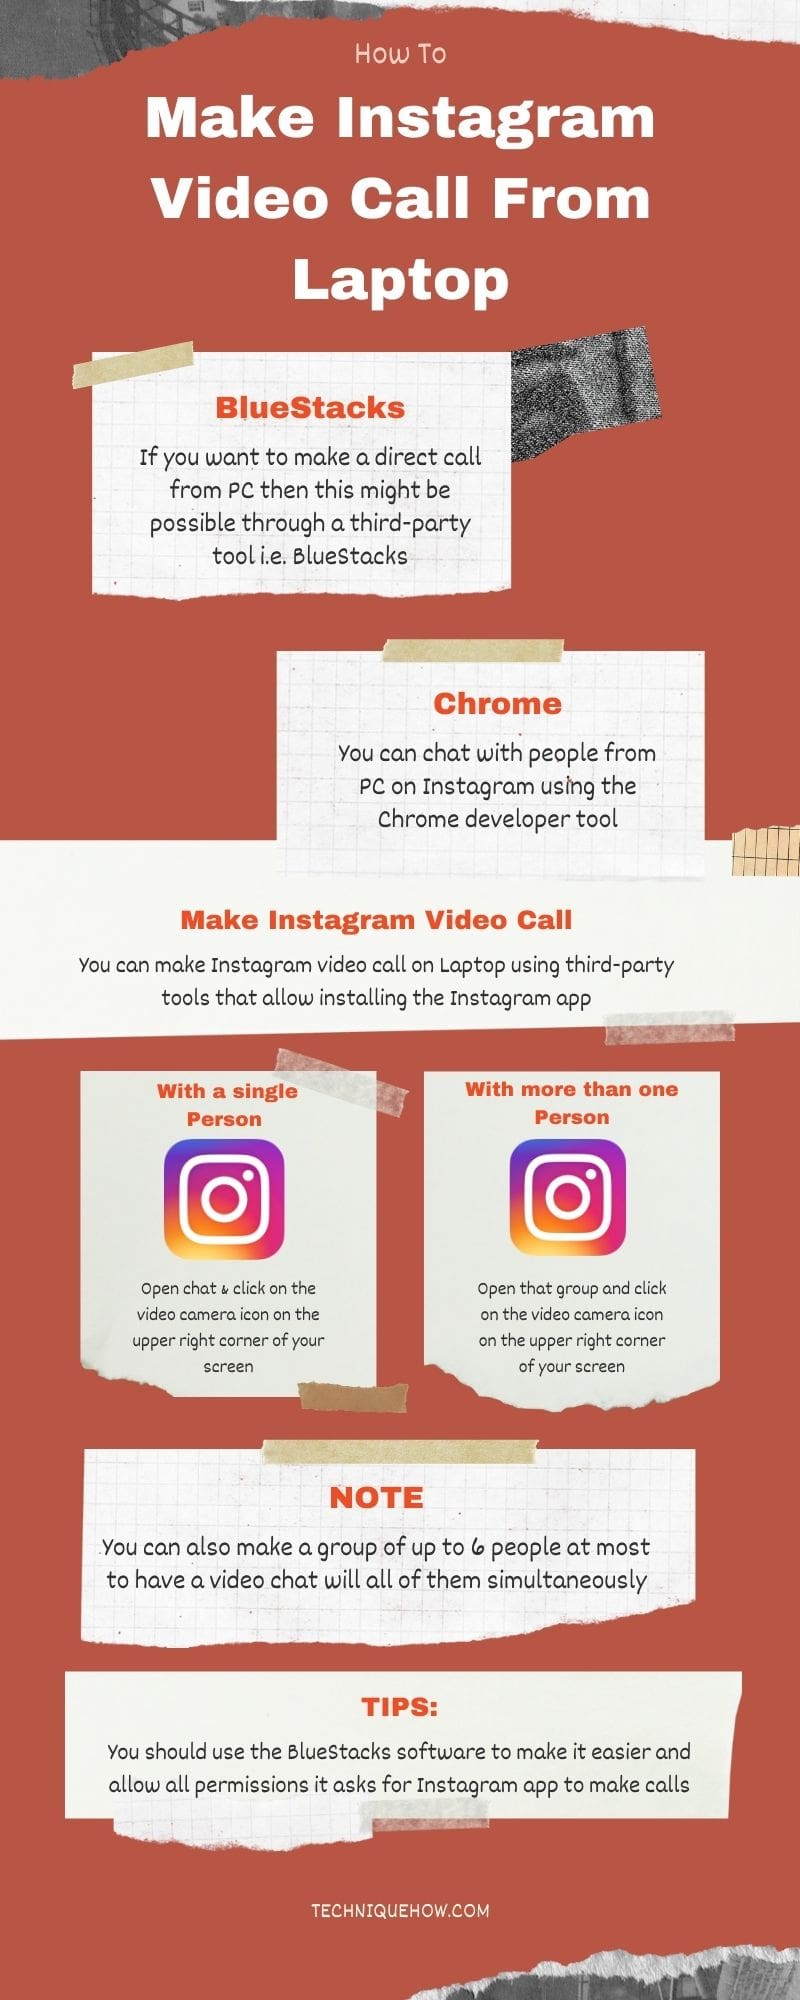 infographic_Make Instagram Video Call on Laptop